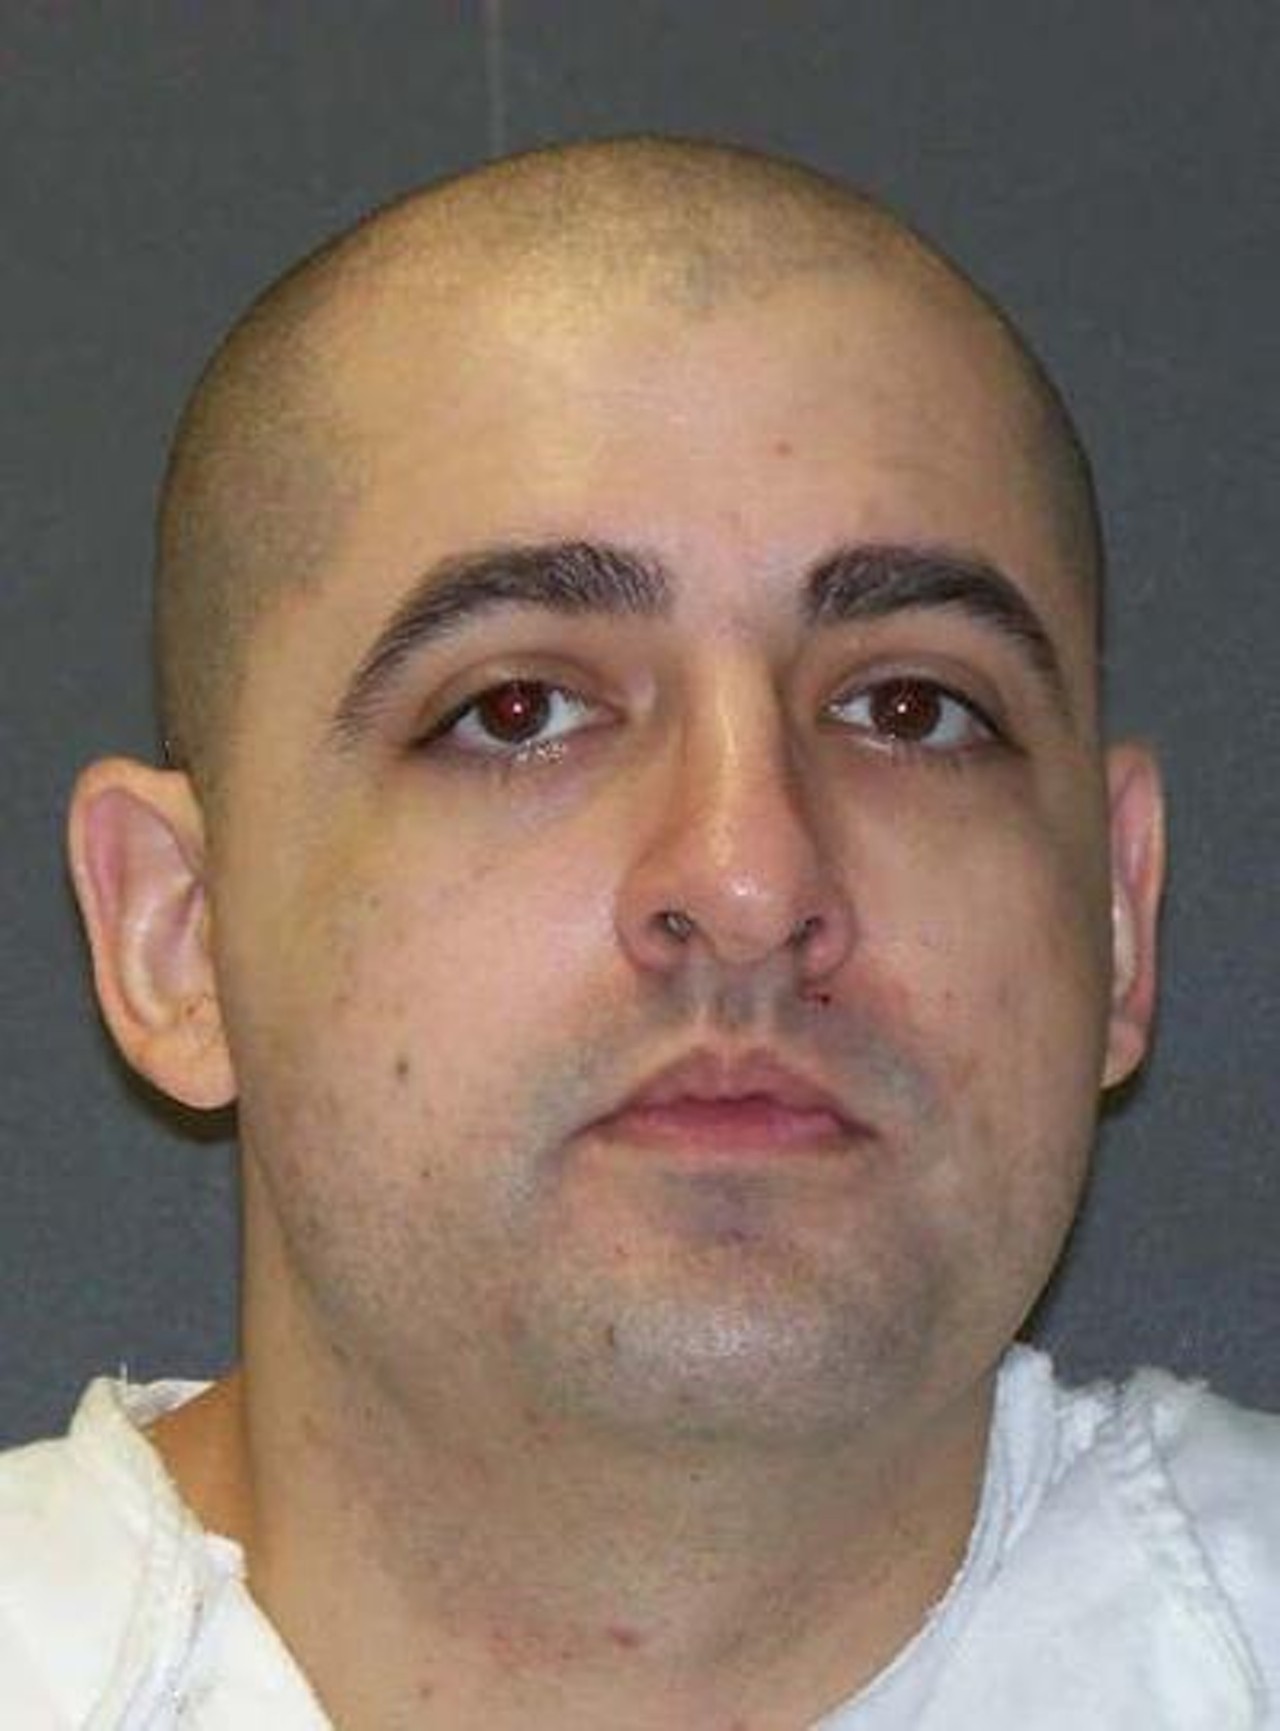 The Lovers’ Lane Killer
Juan Castilo was a young man when, in 2003, he tried to rob Tommy Garcia, who had parked his car on a remote road known as “Lovers’ Lane.” Prosecutors said Garcia was set up by his girlfriend at the time, who reportedly conspired with Castillo and two others to lure him with the promise of sex and drugs. Castillo attempted to rob Garcia, but shot him seven times when he refused and tried running away. Castillo maintained his innocence up until his death row execution in 2018.
Photo via Texas Department of Justice